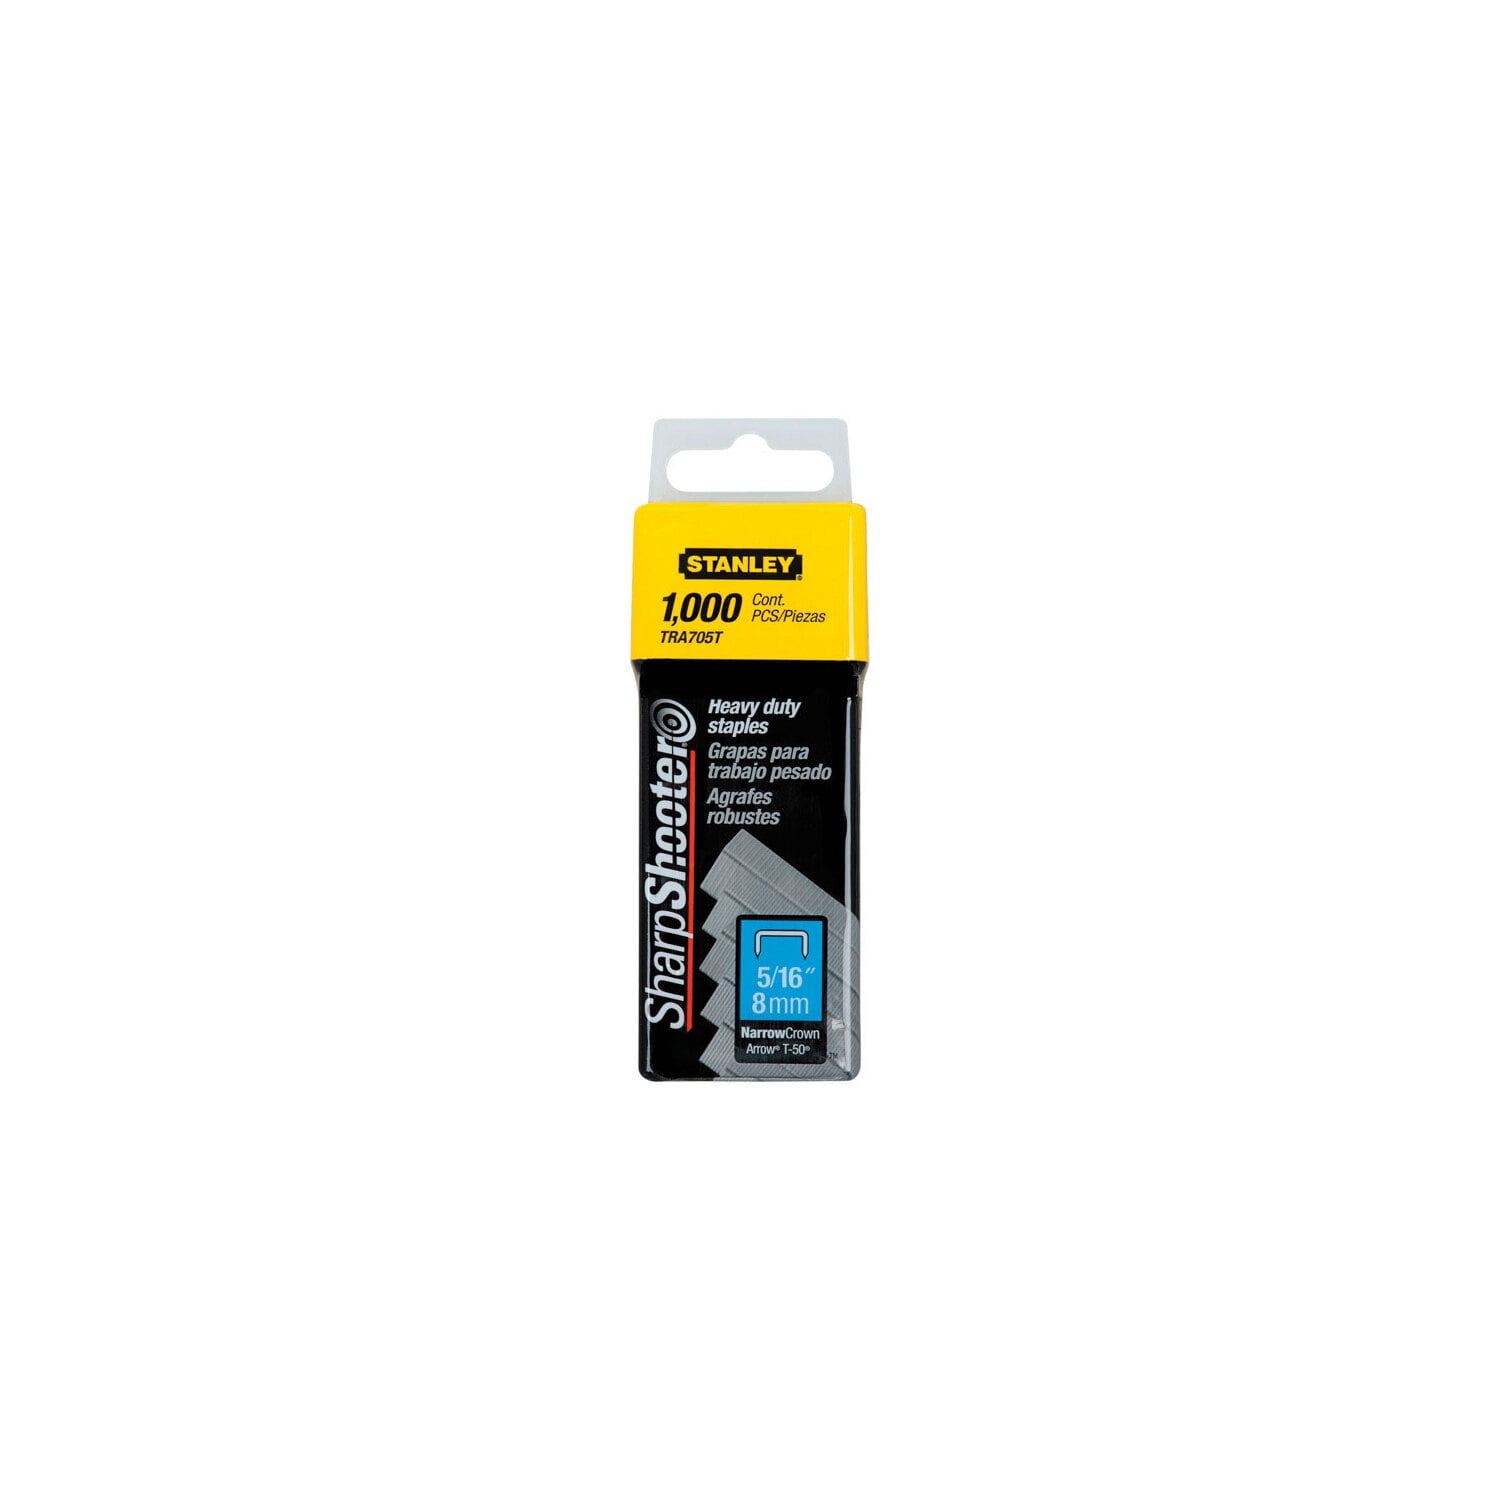 Stanley Tools TRA704T Heavy-Duty Staples 6mm Pack 1000 